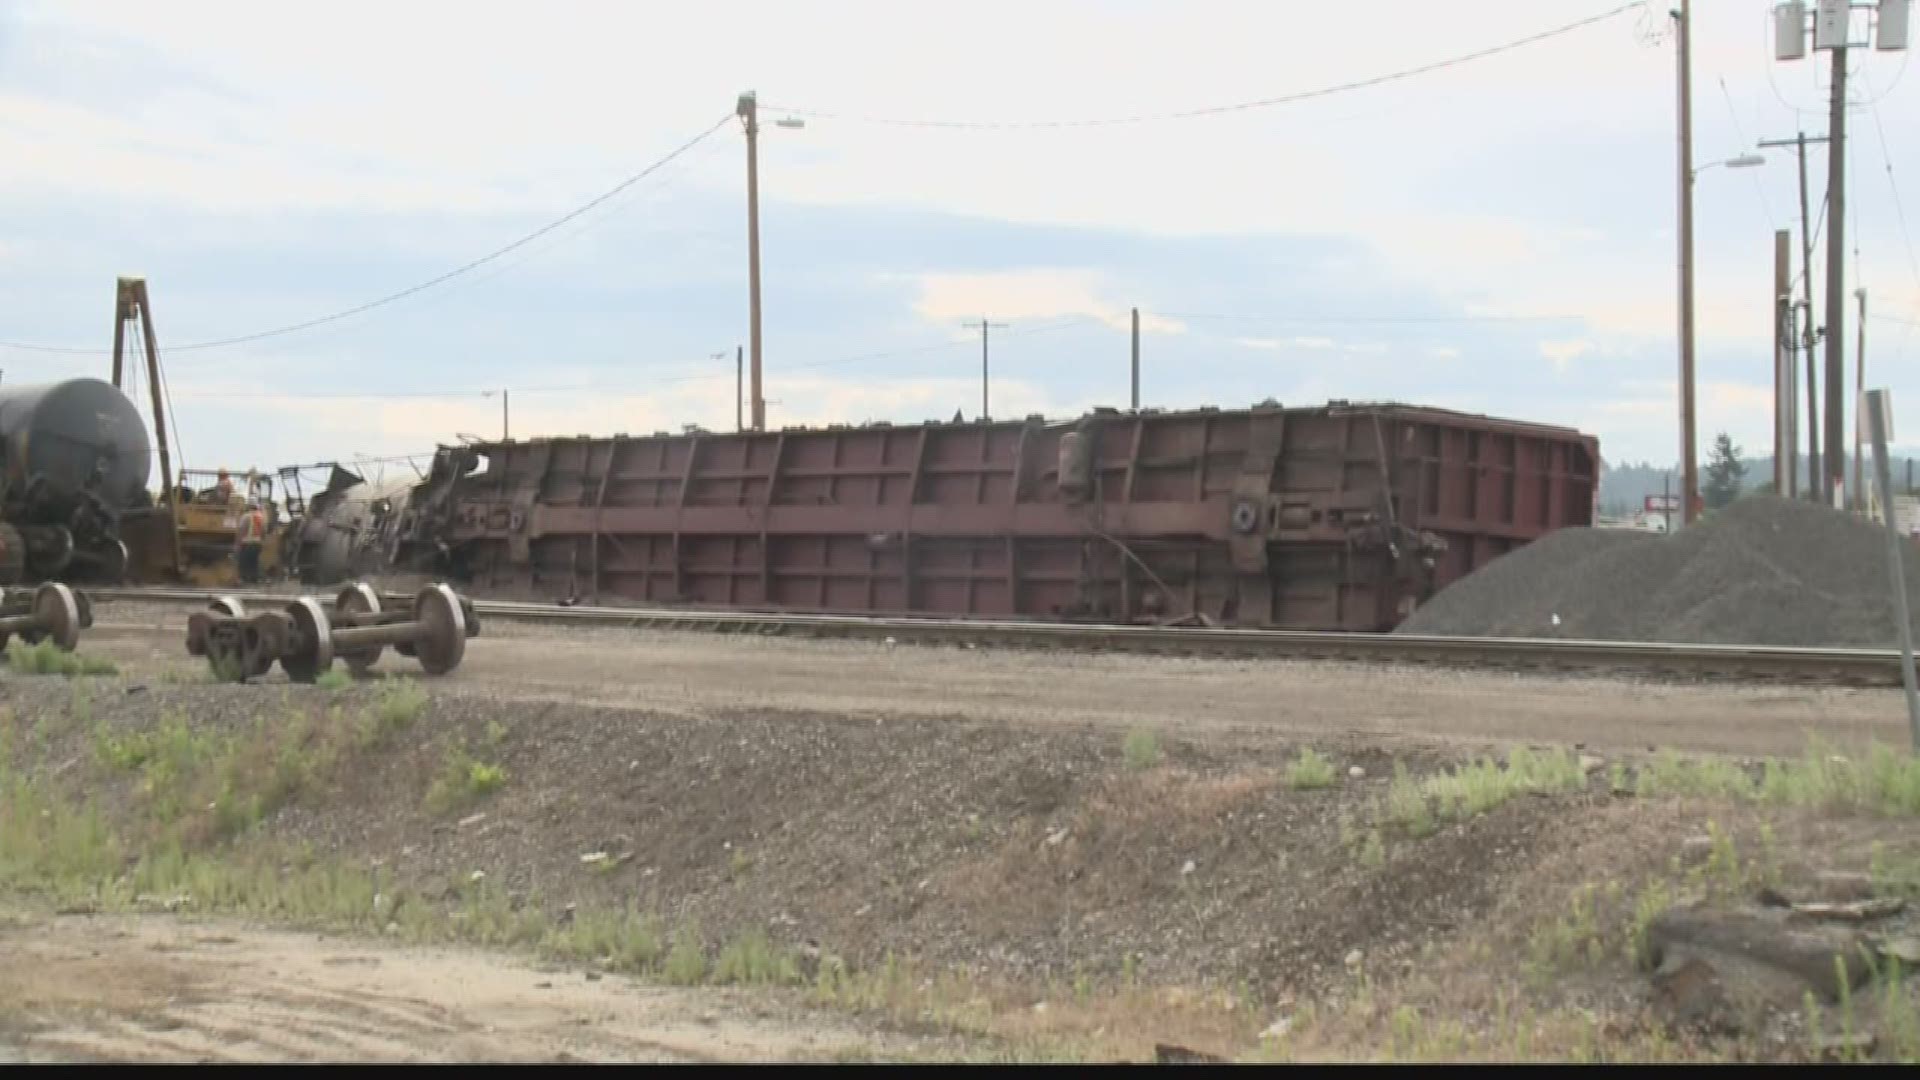 KREM's Taylor Viydo explains what we know so far after a train derailed in Spokane Tuesday night, taking six cars carrying molten sulfur off the rails.